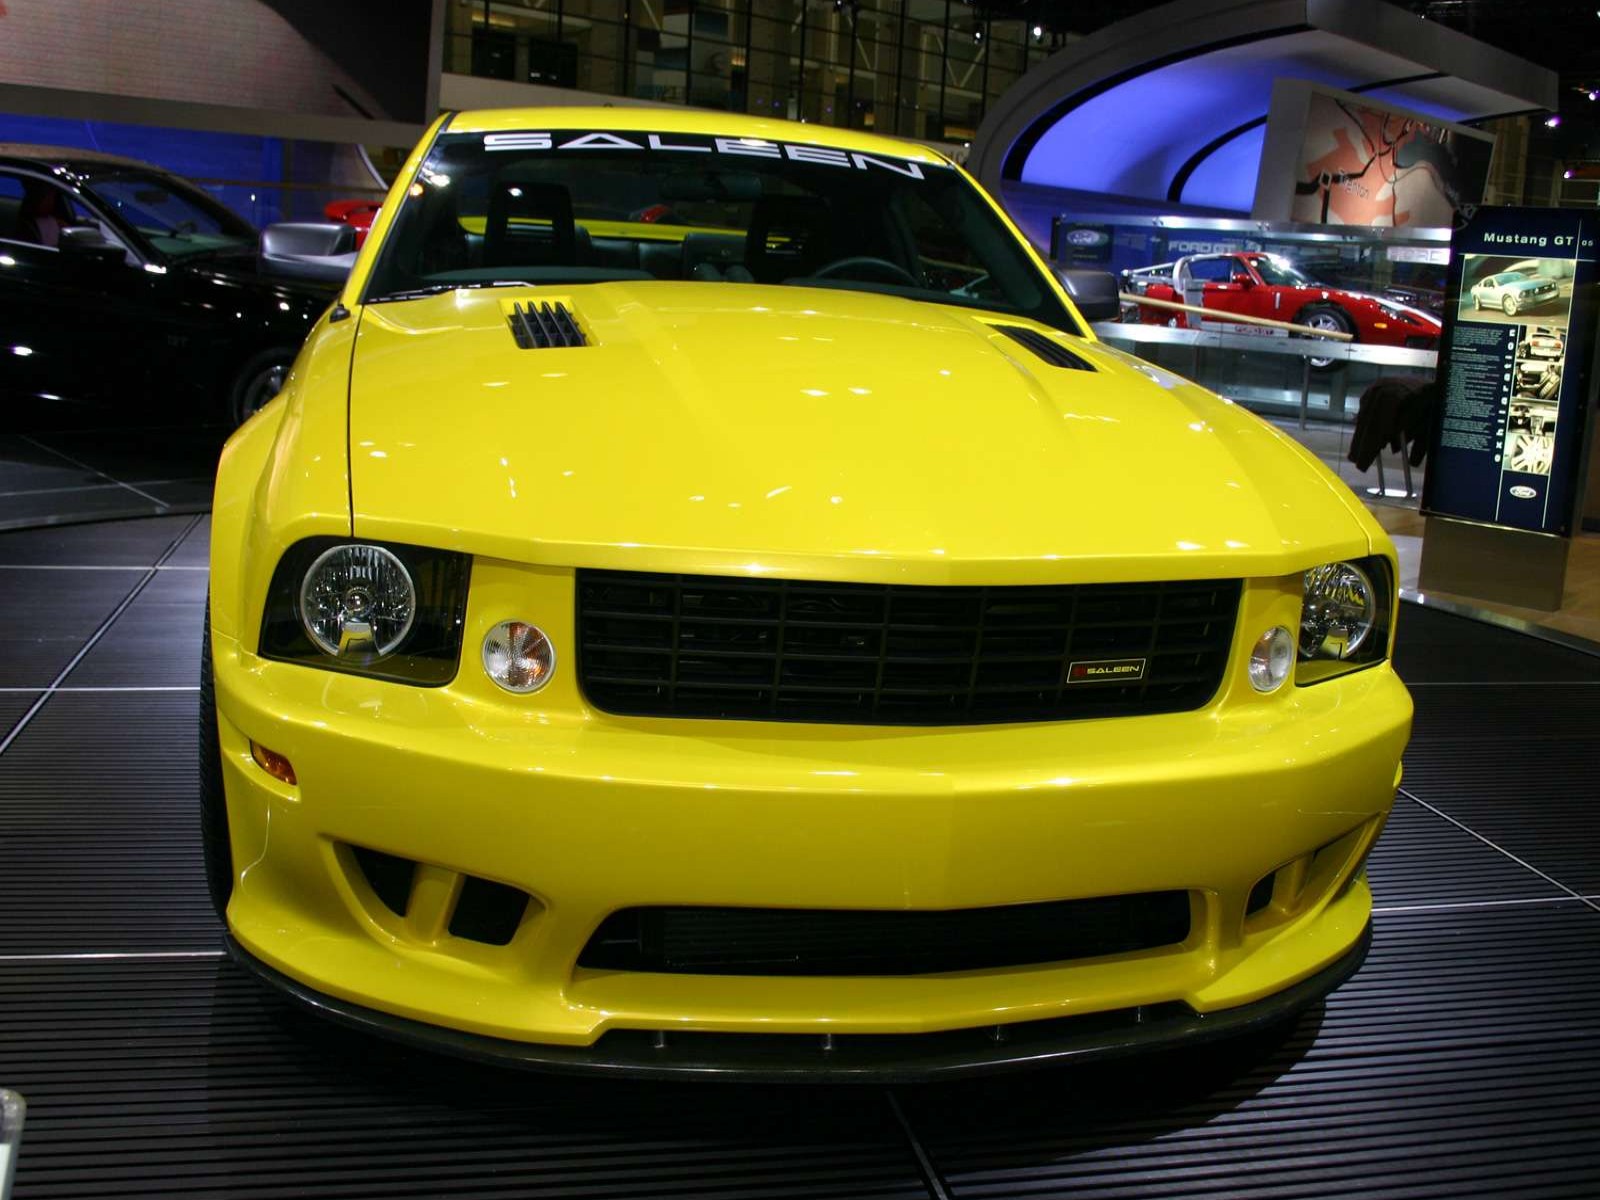 Car Pictures: Saleen Ford Mustang S281 Extreme 2005